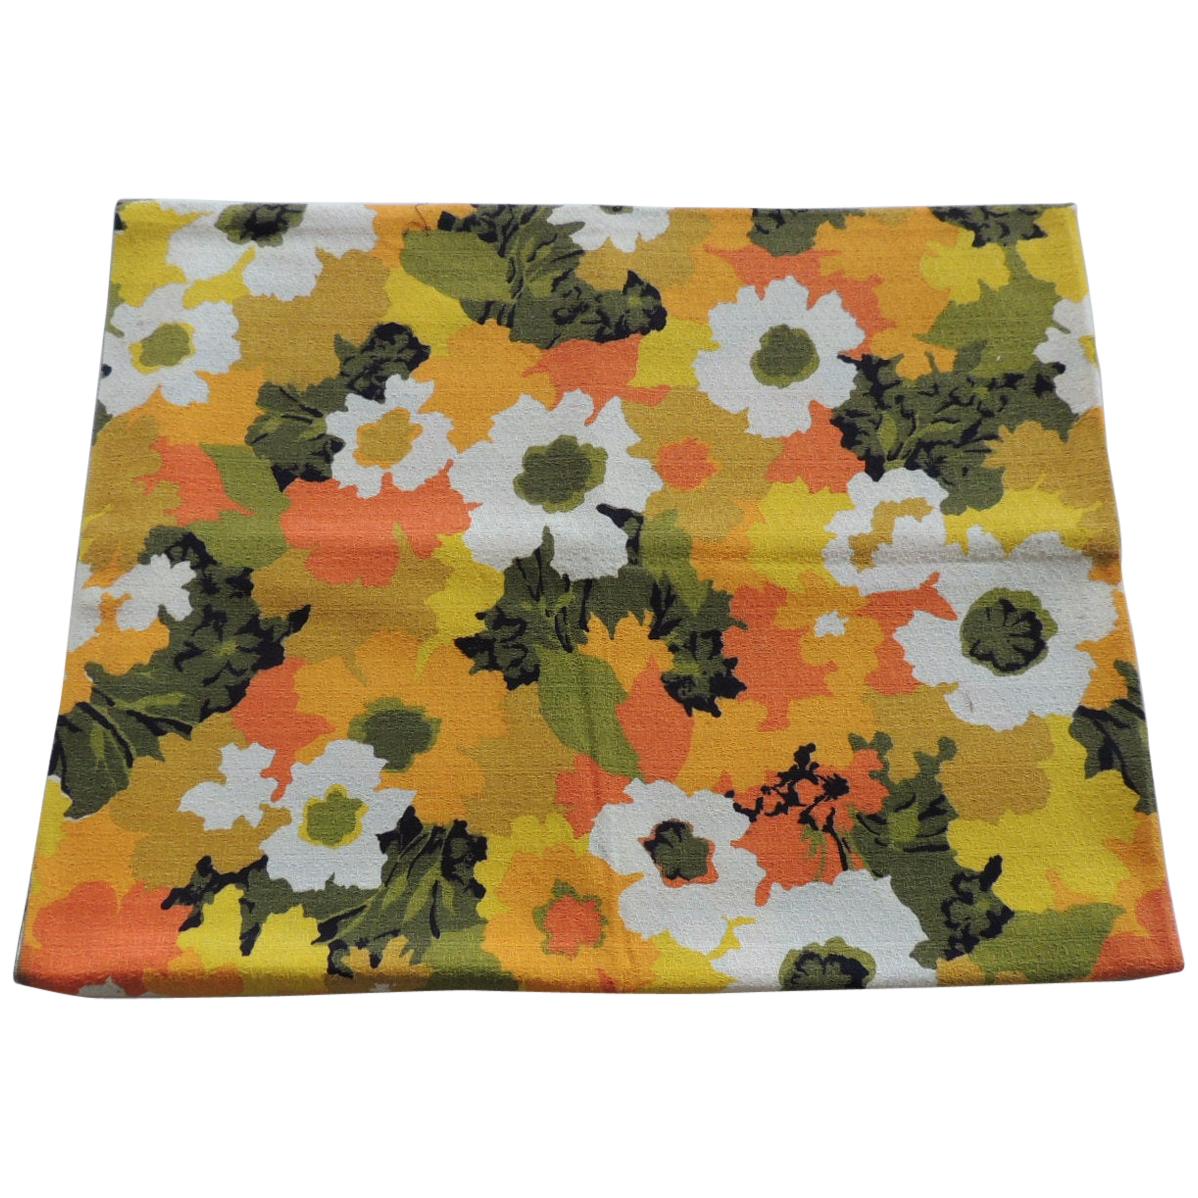 Fabric by the Yard: Pop Art Style Colorful Floral Cotton Fabric